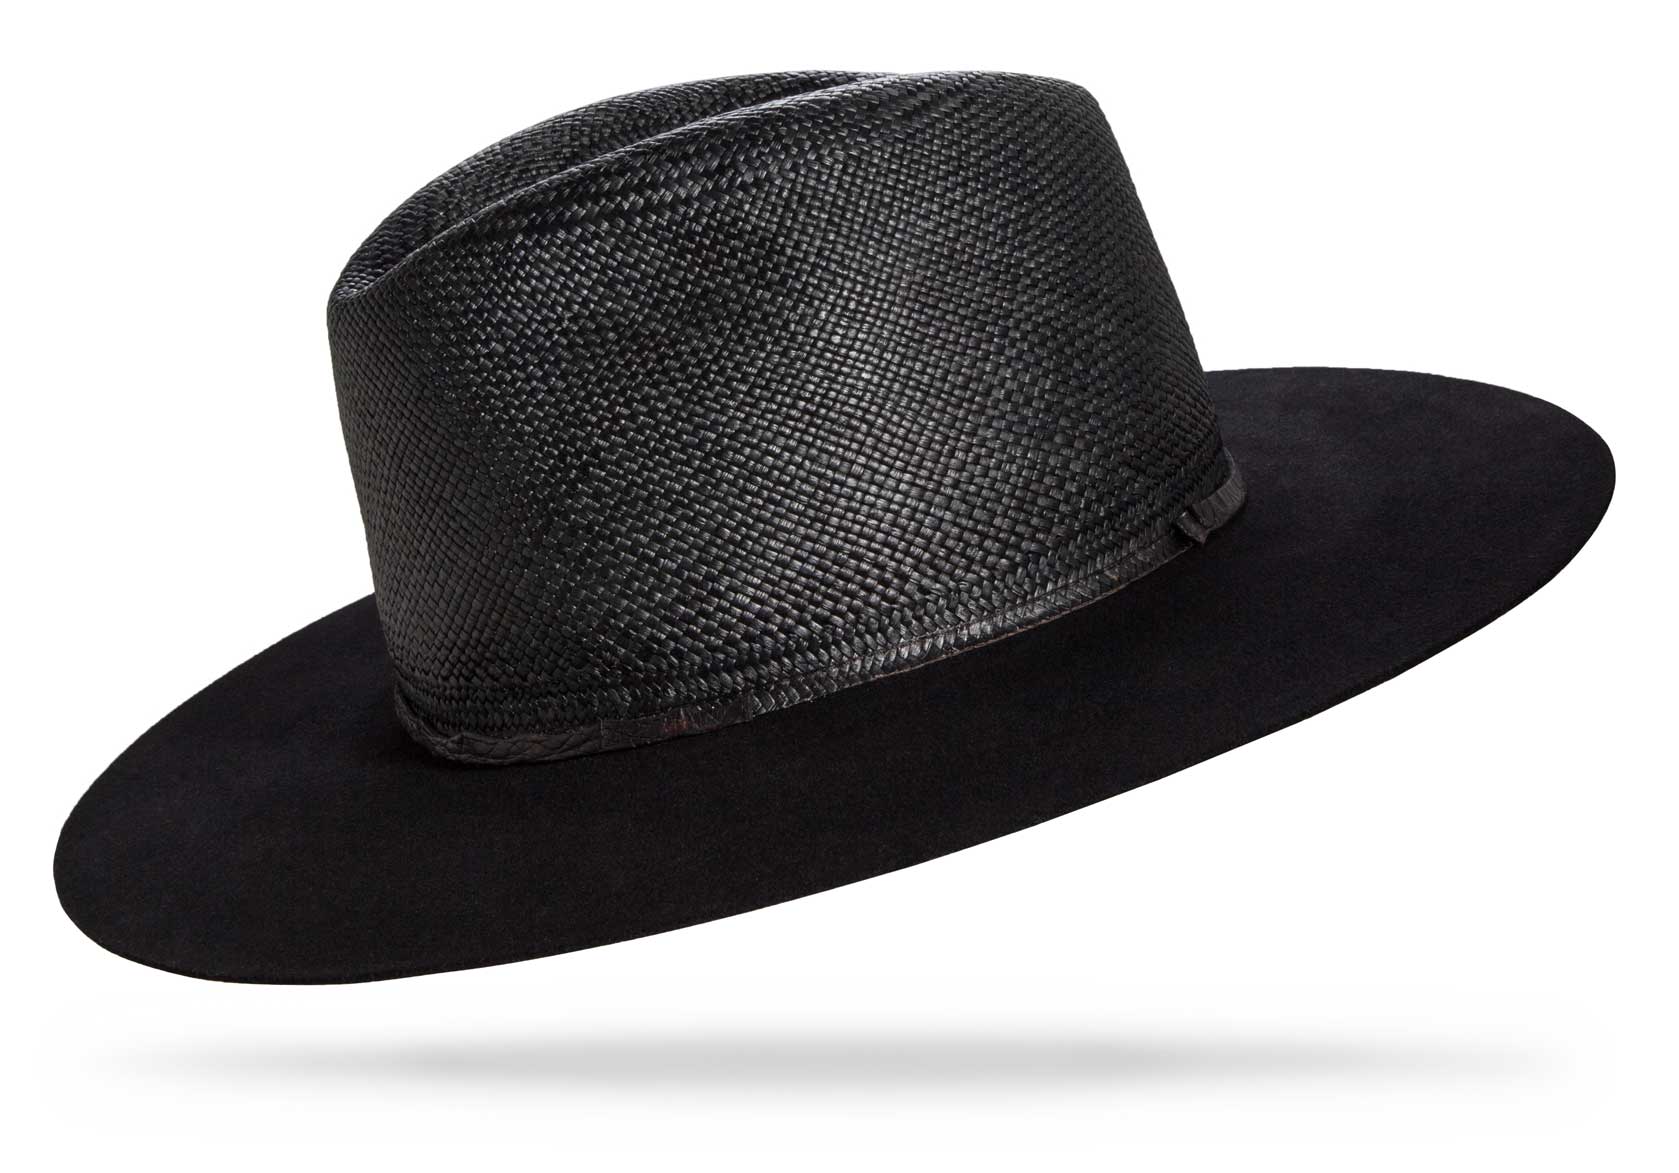 Design
The 3 shades of black. Black Cuenca Brisa weave, black Beaver Felt, and Black Croc Band. Black on Black on Black.
Material
Cuenca Brisa weave crown, 100% Western Beaver Fur Felt sustainably acquired for the brim, and Croc band.
Specifications
C semi teardrop 4 crown with a 3 1/4 Beaver Felt brim. Handmade in our atelier in NYC. Please allow 6-8 weeks to custom make this special piece.